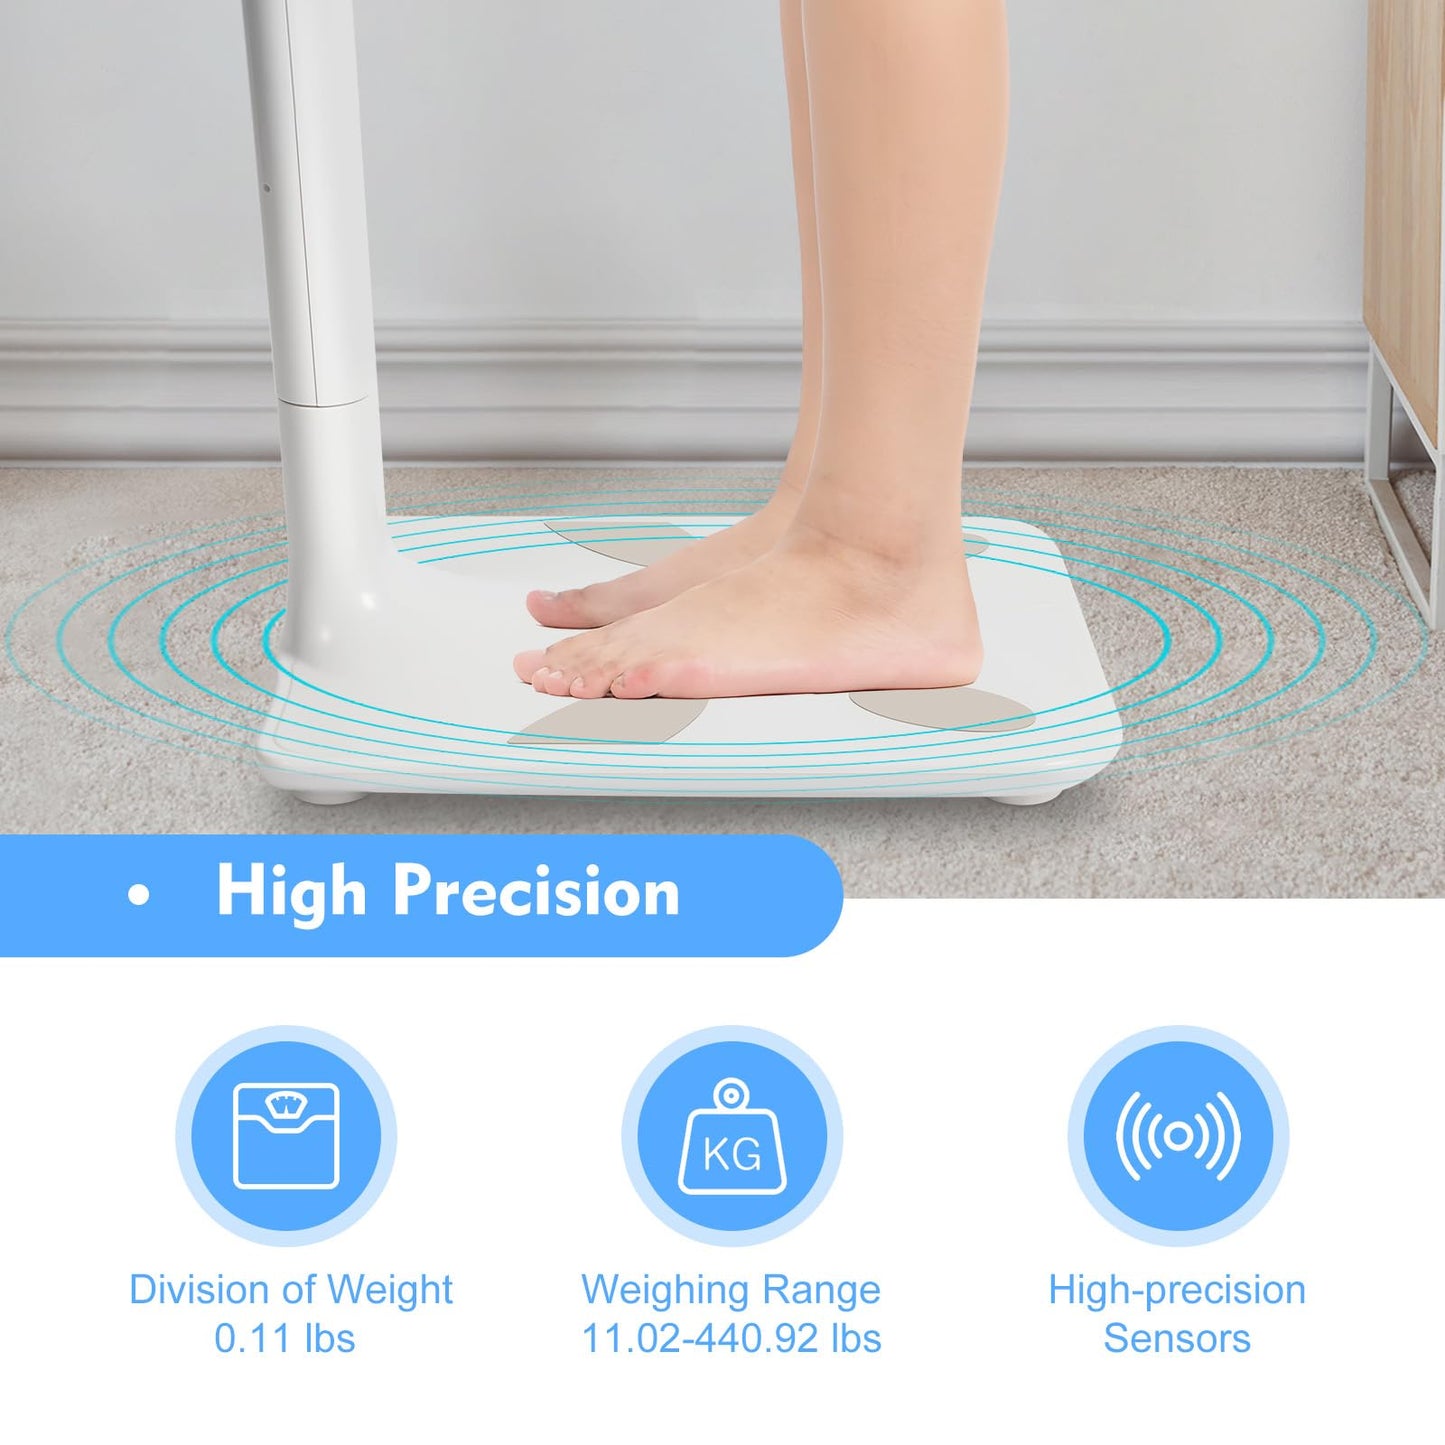 Medical Body Weight Scale, Digital Scales for Body Weight Multifunctional Physician Scale Professional Doctor Office Medical Scale for Measure Height